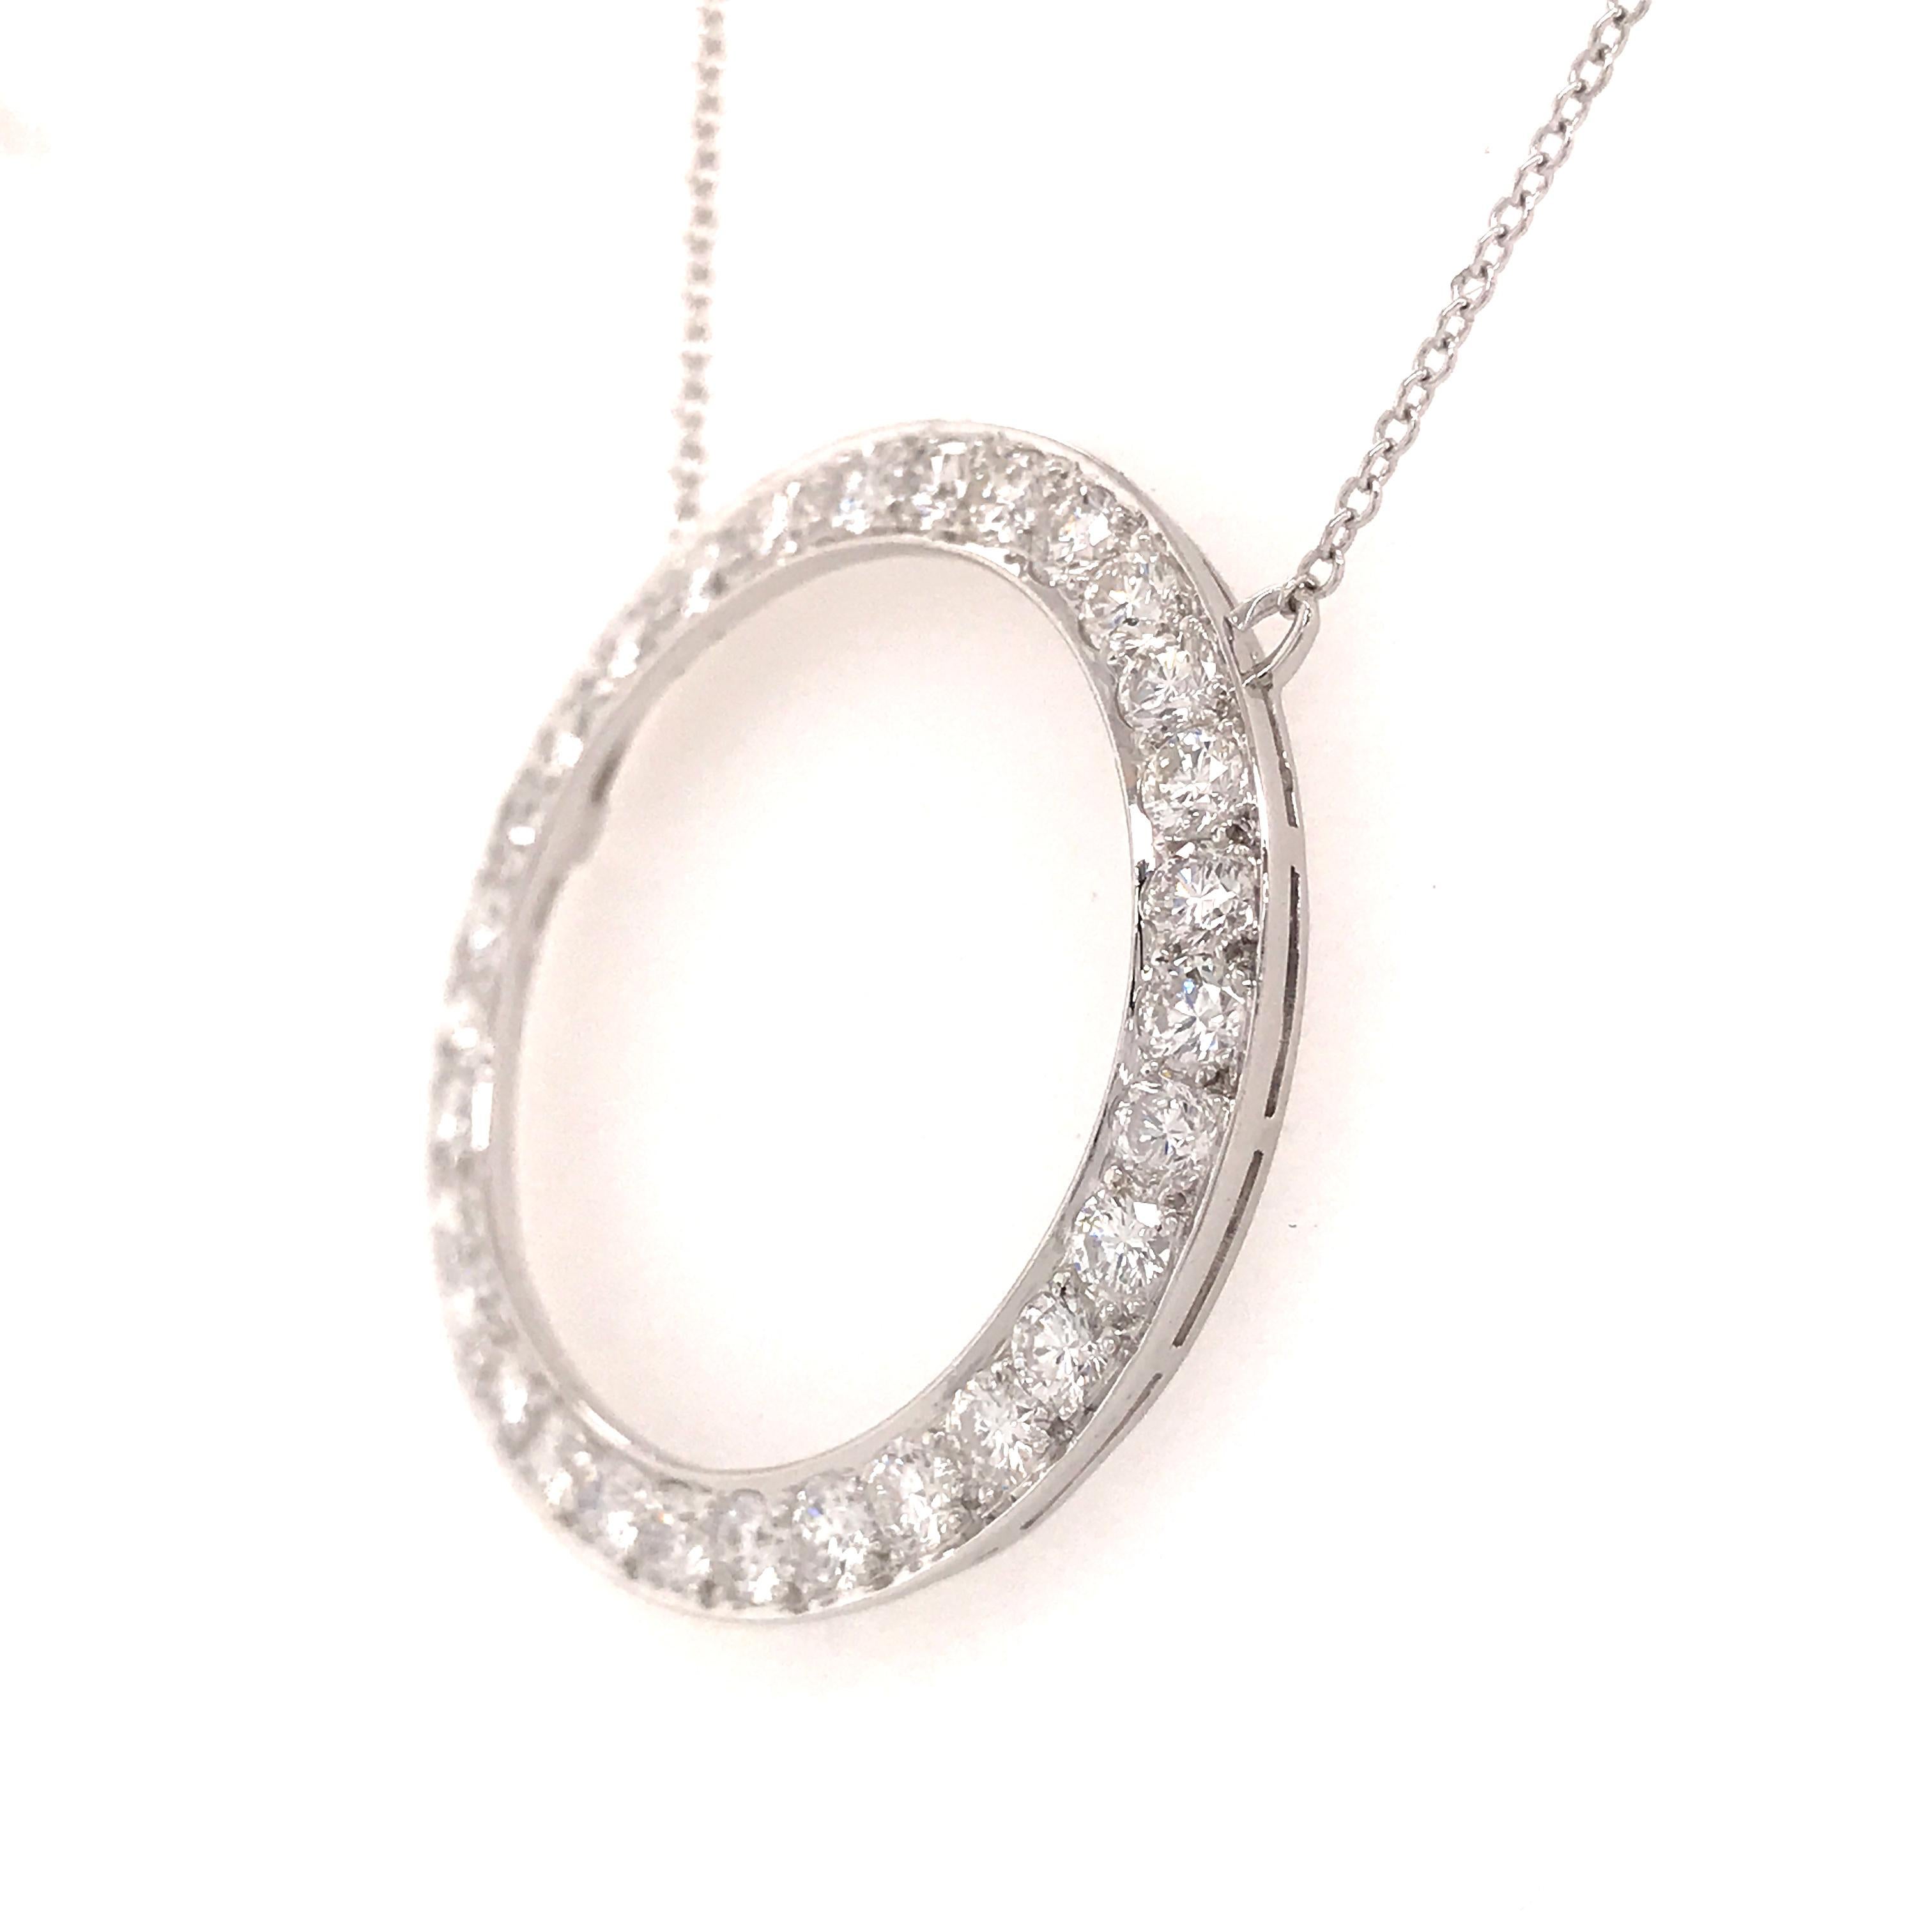 Tiffany & Co. Diamond Circle Pendant in Platinum.  (30) Round Brilliant Cut Diamonds weighing 2.0 carat total weight, F-G in color and VS in clarity are prong set in this classic piece.  The necklace measures 17 inches in length.  The Circle